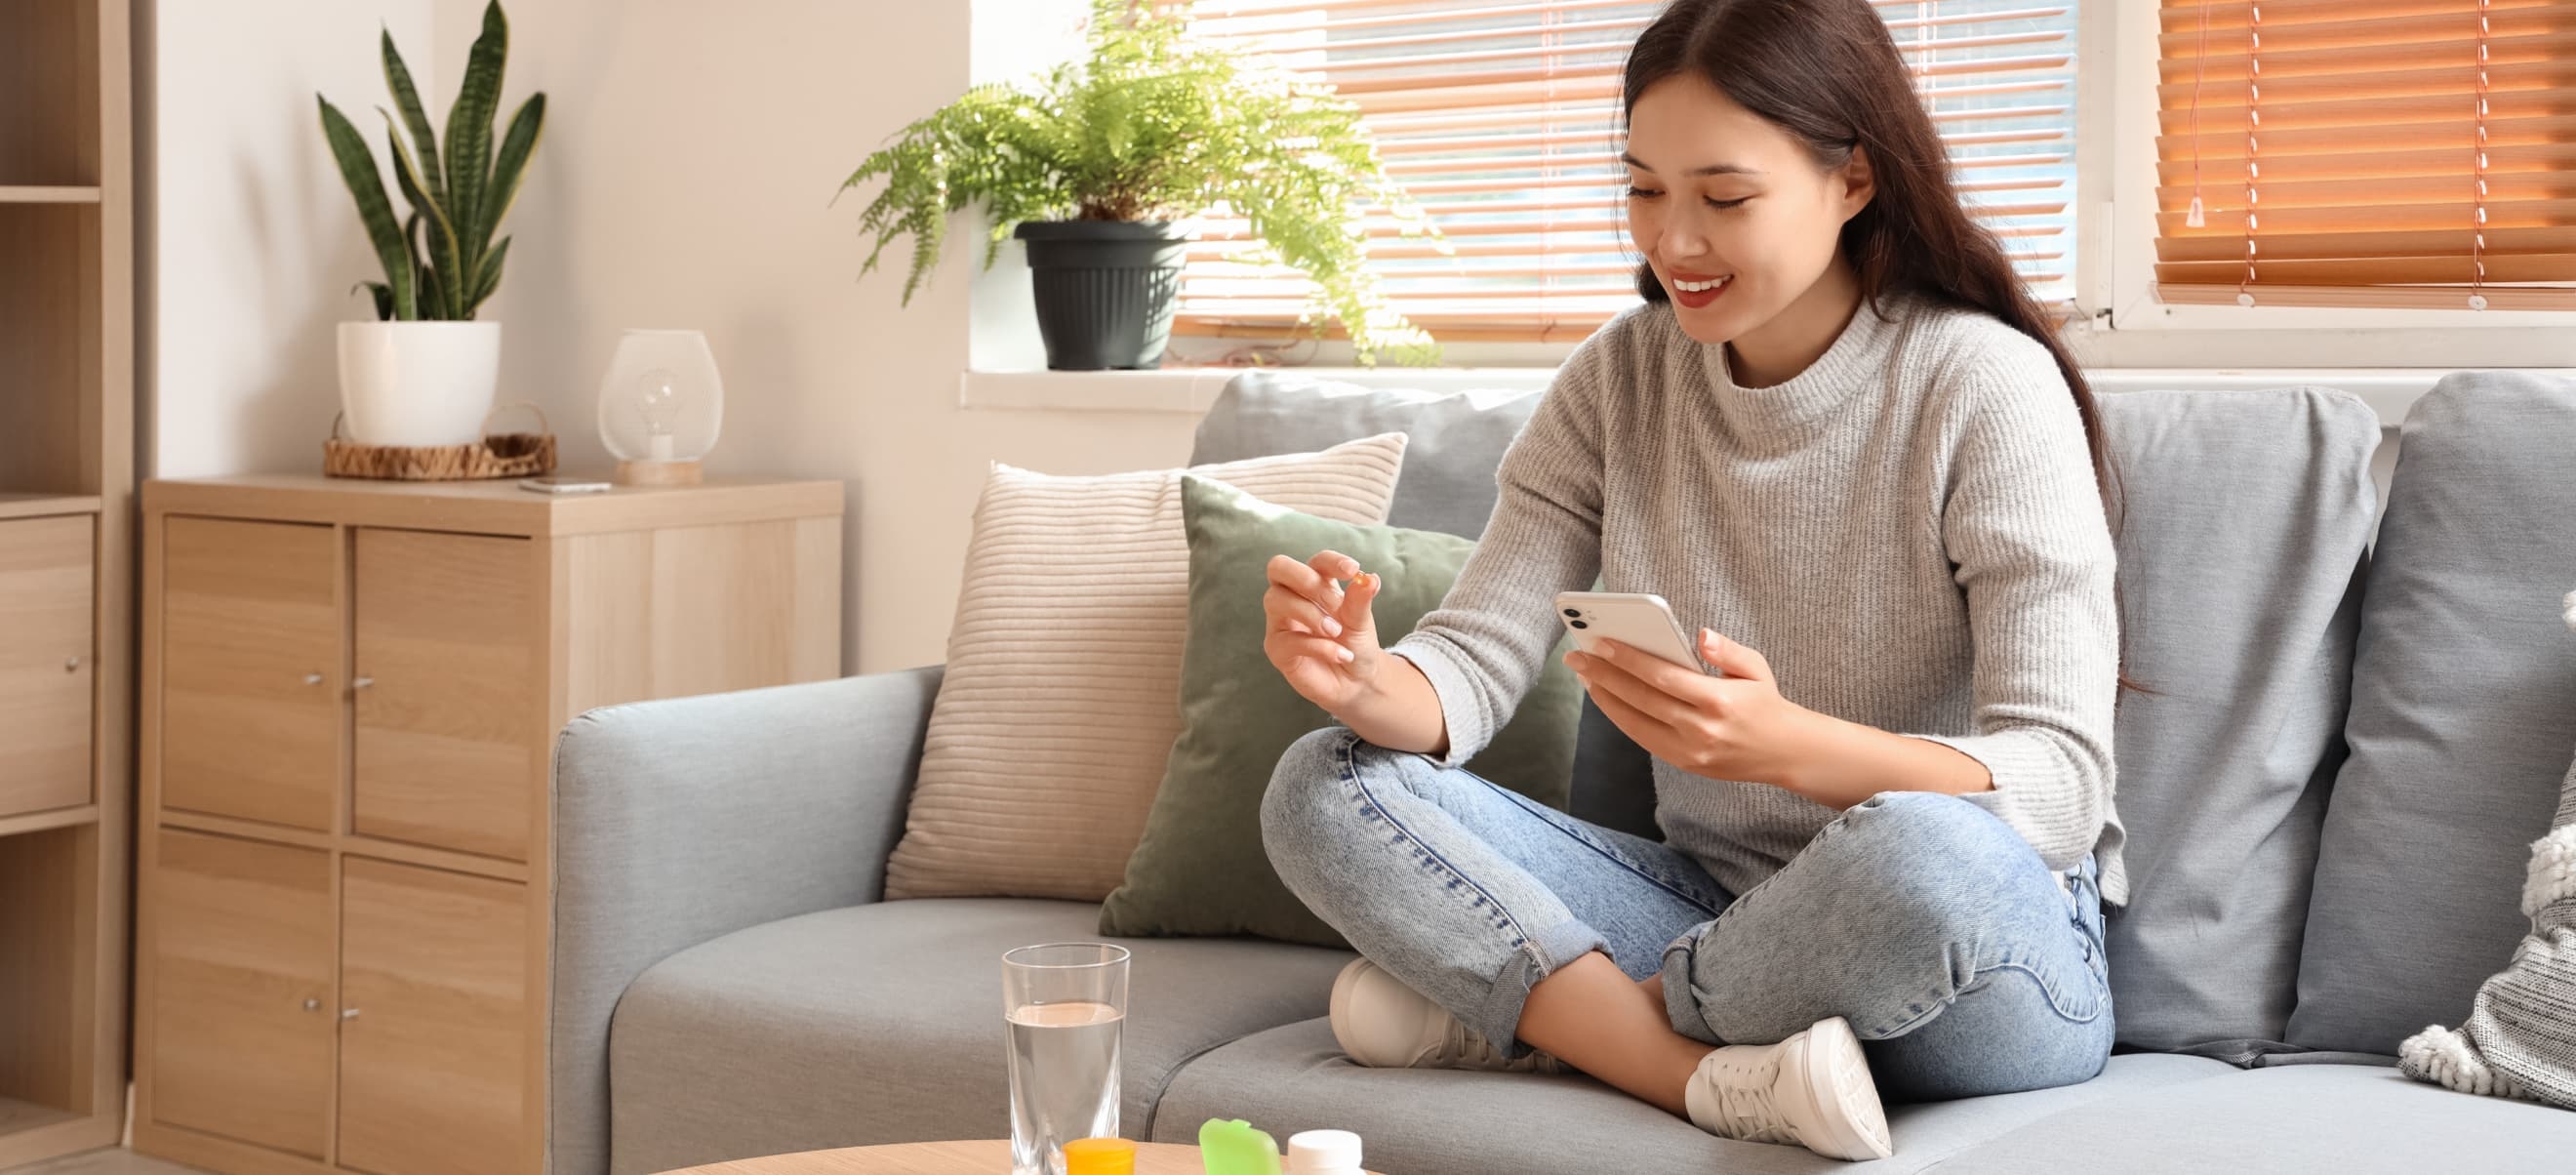 A woman sits cross-legged on a grey sofa, holding a smartphone with the Magellan app open and smiling. She is wearing a grey sweater and jeans. A glass of water and some items are on the table in front of her.